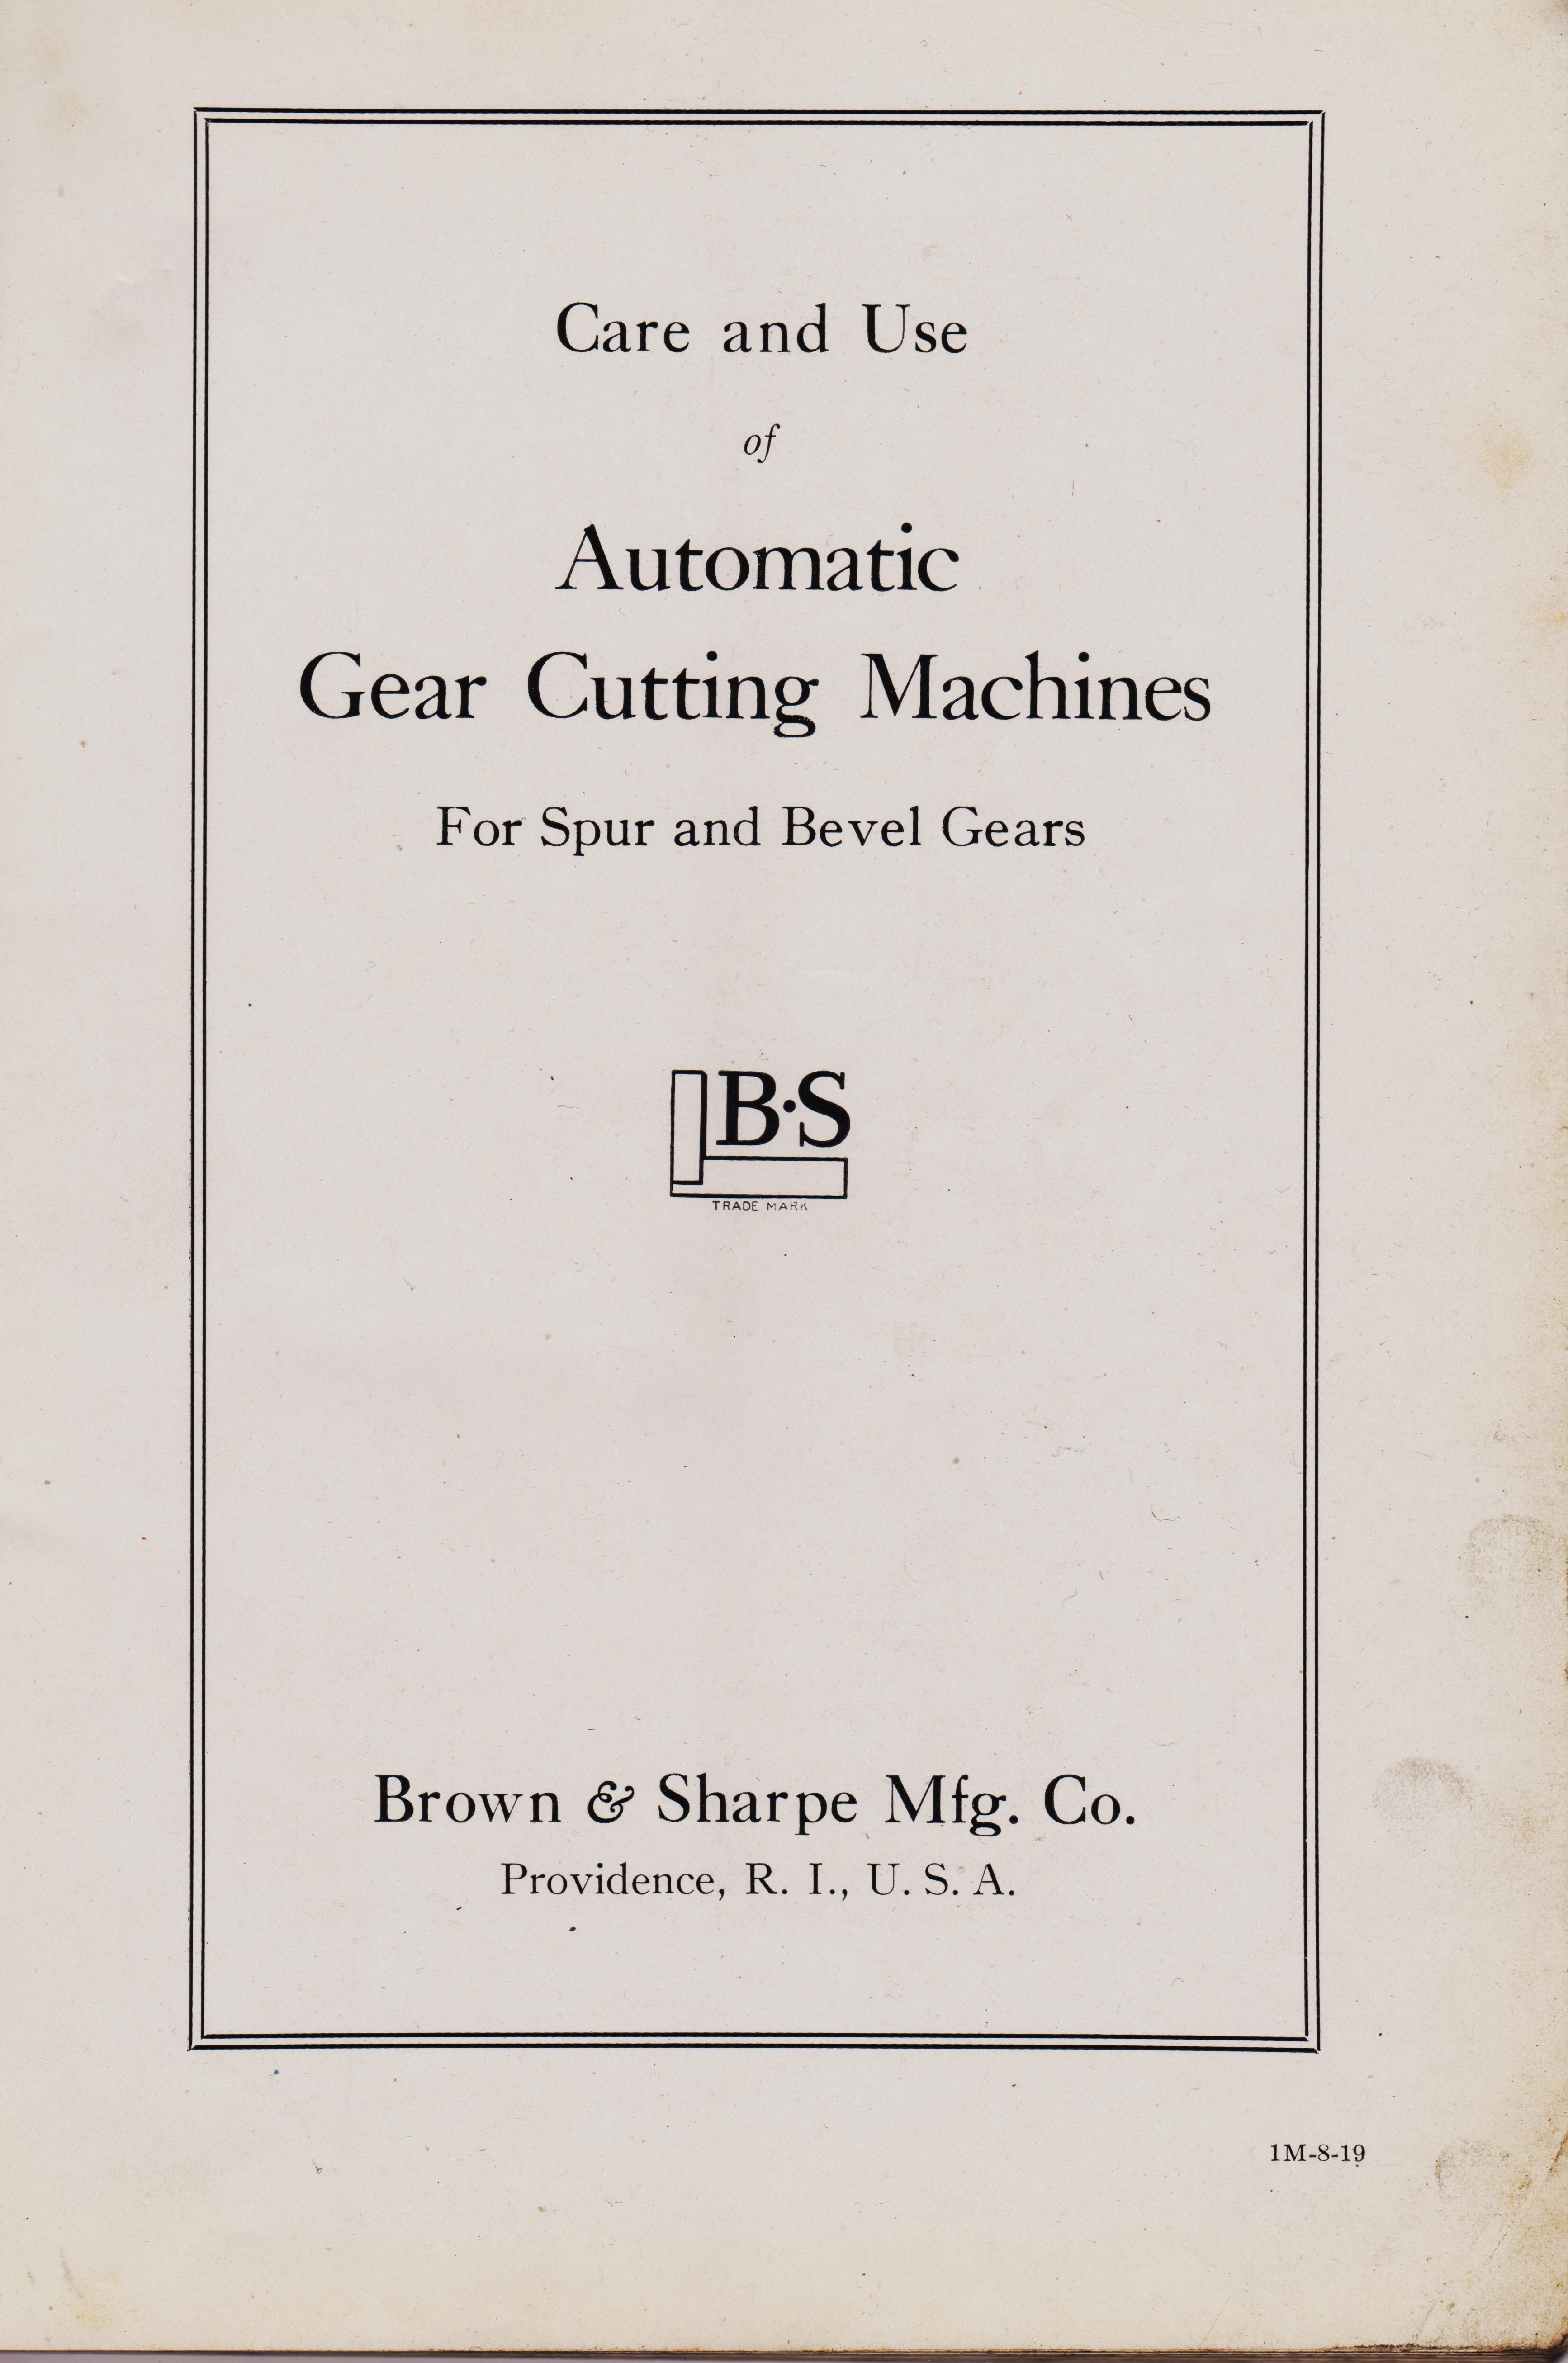 https://antiquemachinery.com/images-2020/Automatic-Gear-Cutting-Machines-Brown-and-Sharpe-Mfg-Co-1914-pg-1-Title-Page.jpg